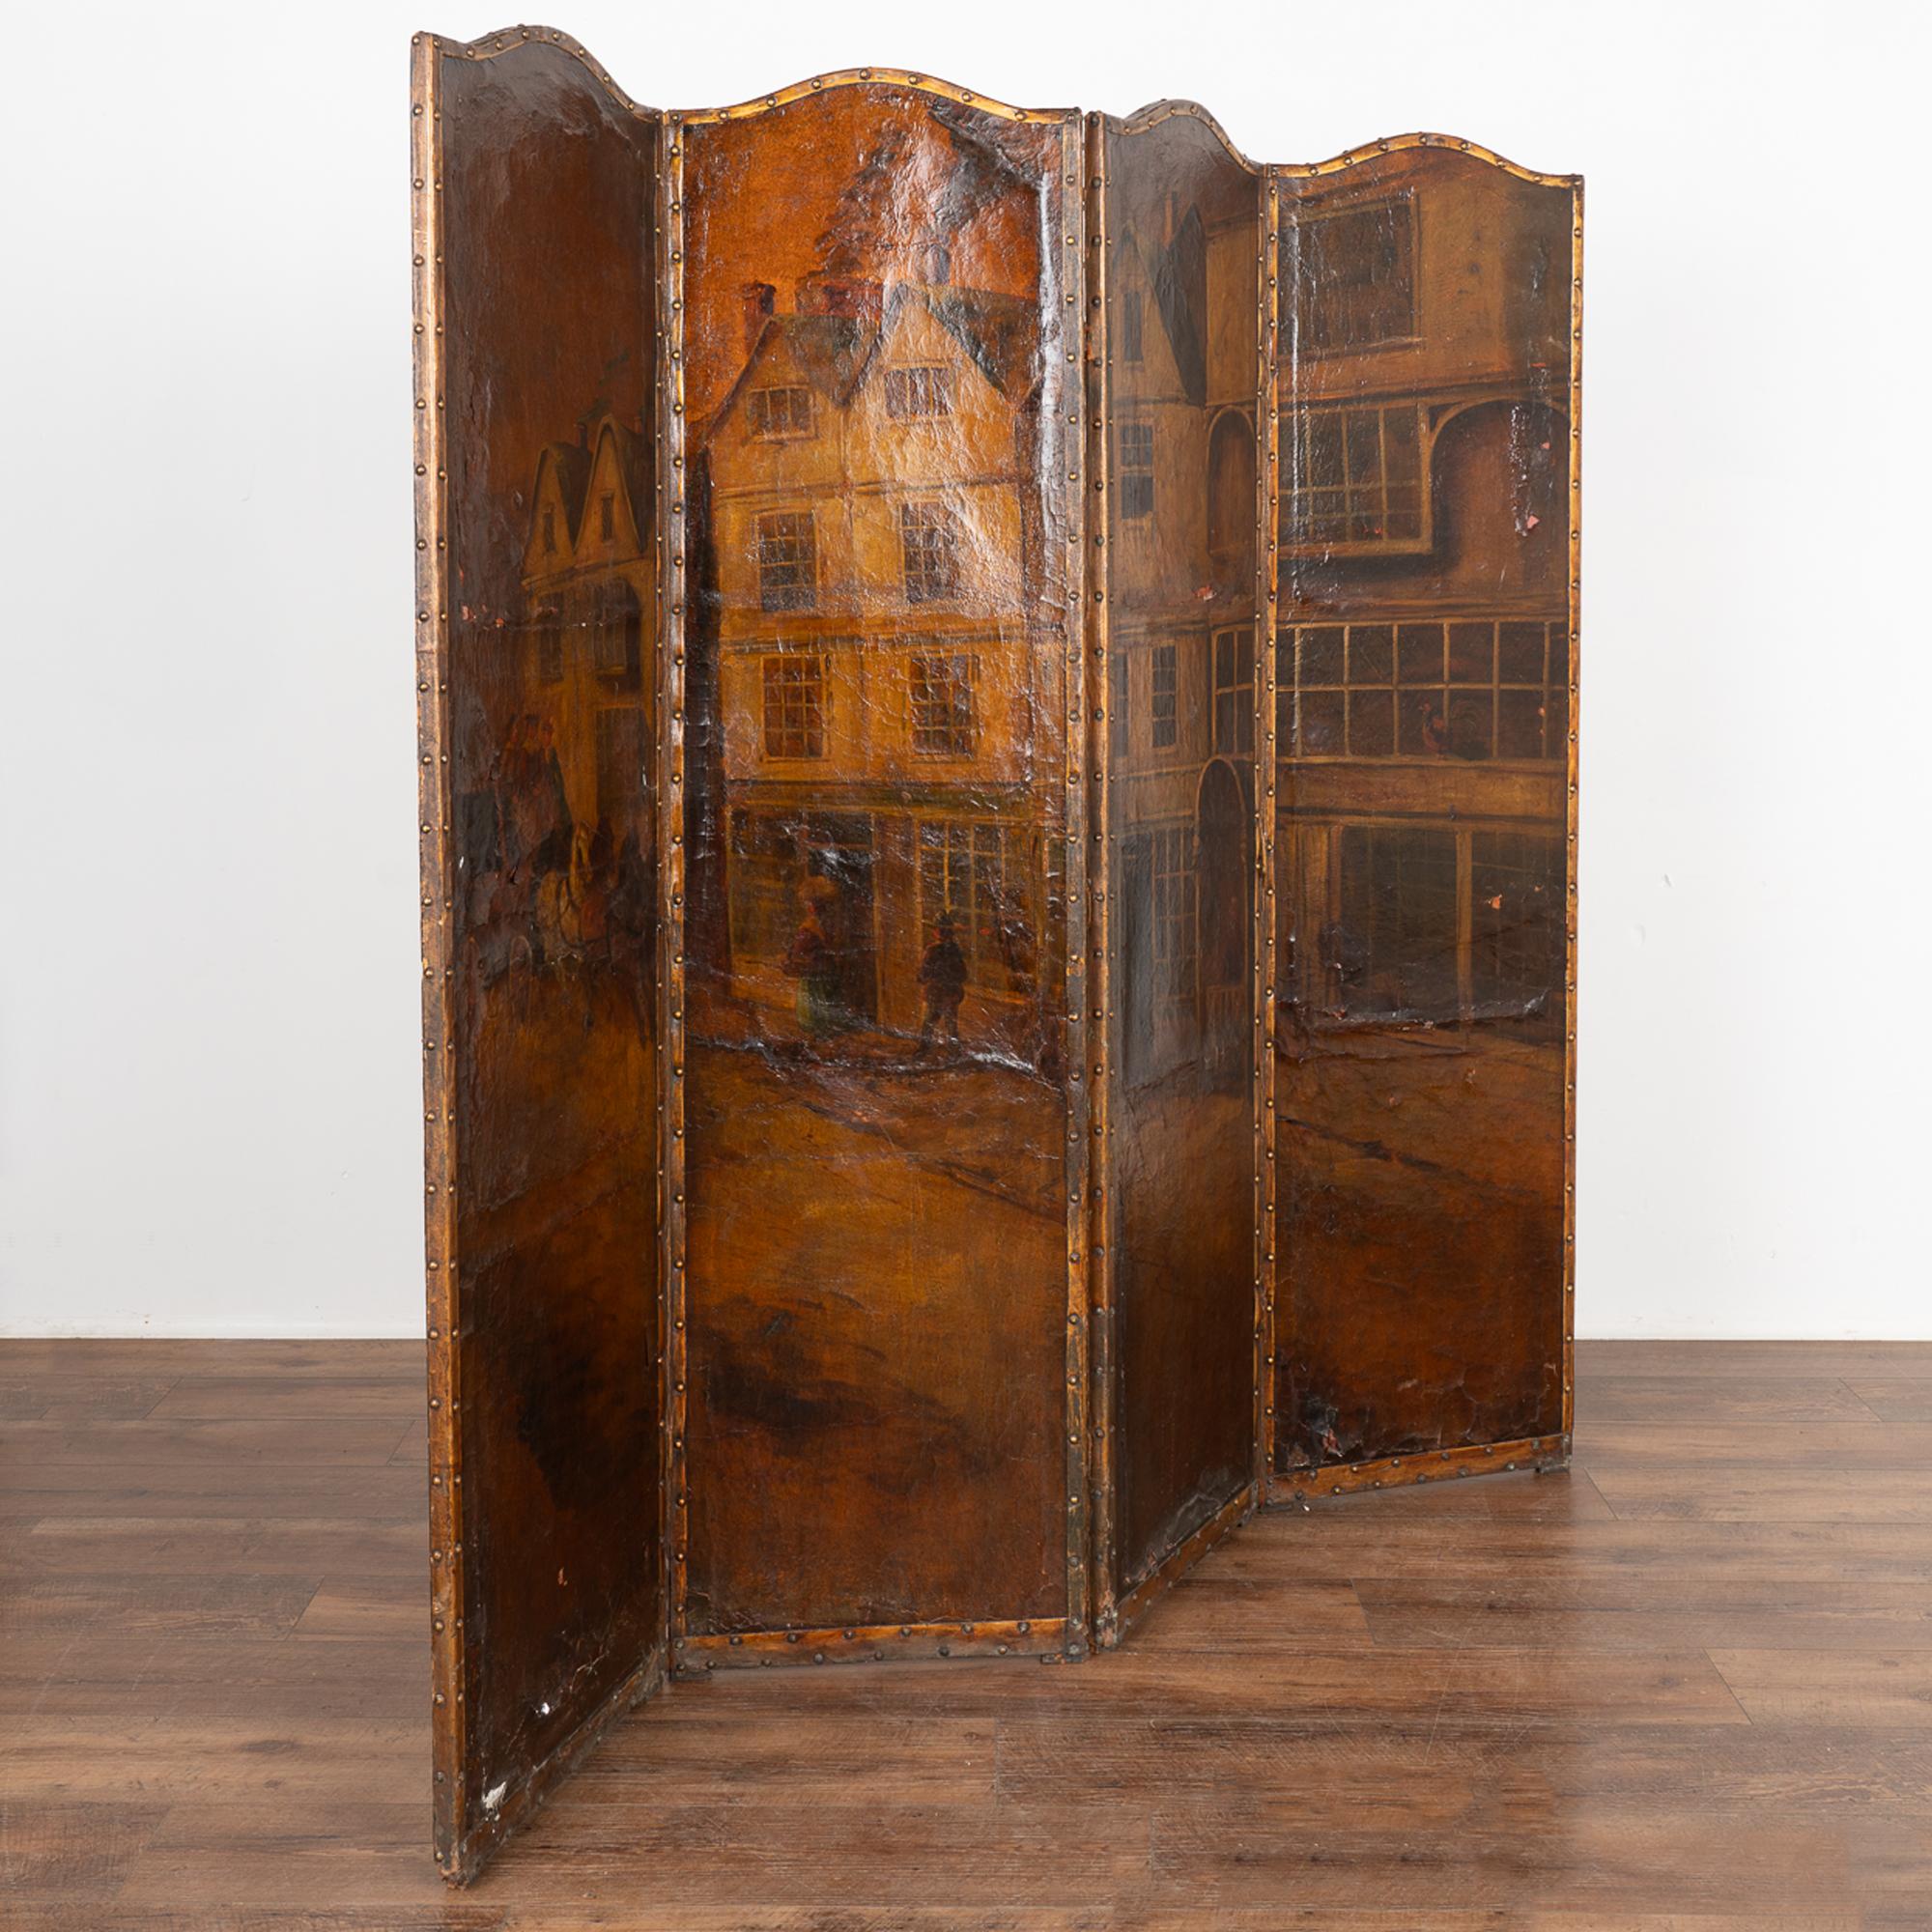 Original oil on canvas painted panels form this impressive baroque style folding screen from the early 1900's.
A city street scene with horse drawn carriage and lady walking along sidewalk. Backside is black with gold trim.

Wear commensurate with